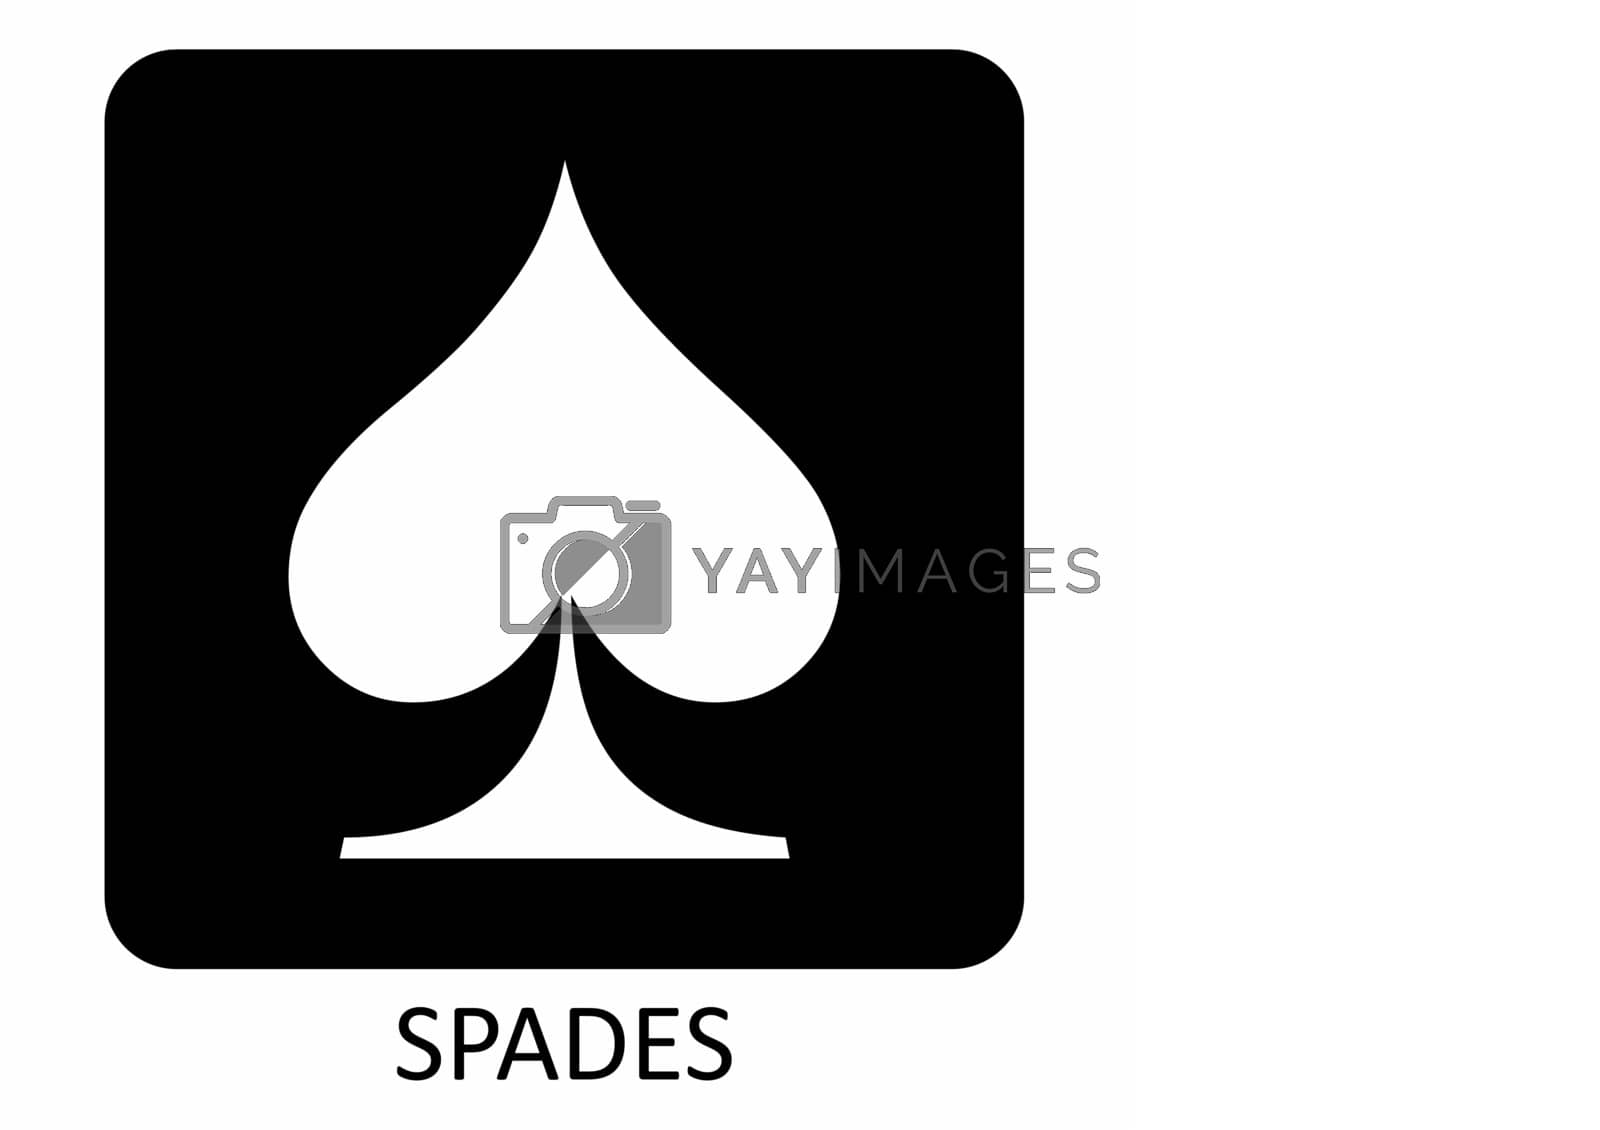 Royalty free image of Spades suit icon illustration by luisrftc